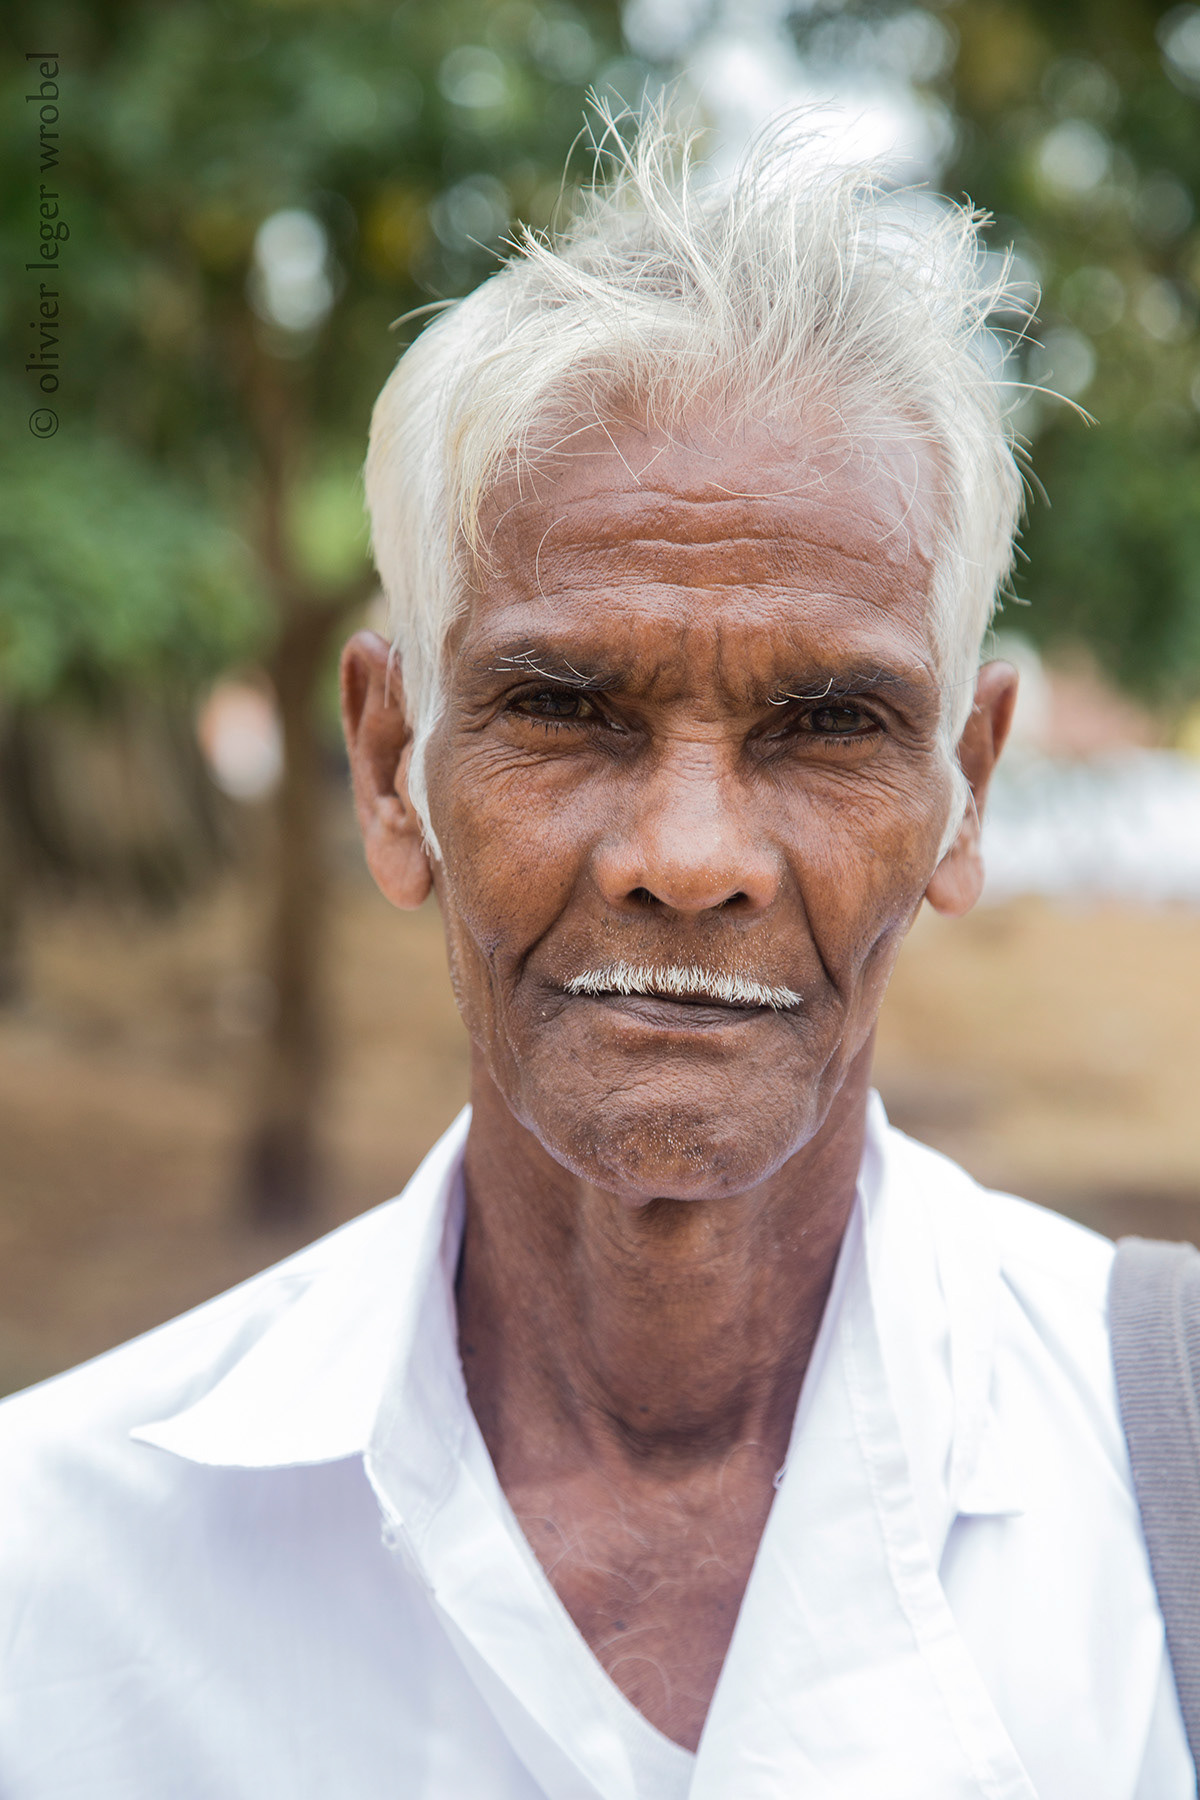 face faces old Wise amazing wrinkle ride ridule Third Expression grandpa srilanka